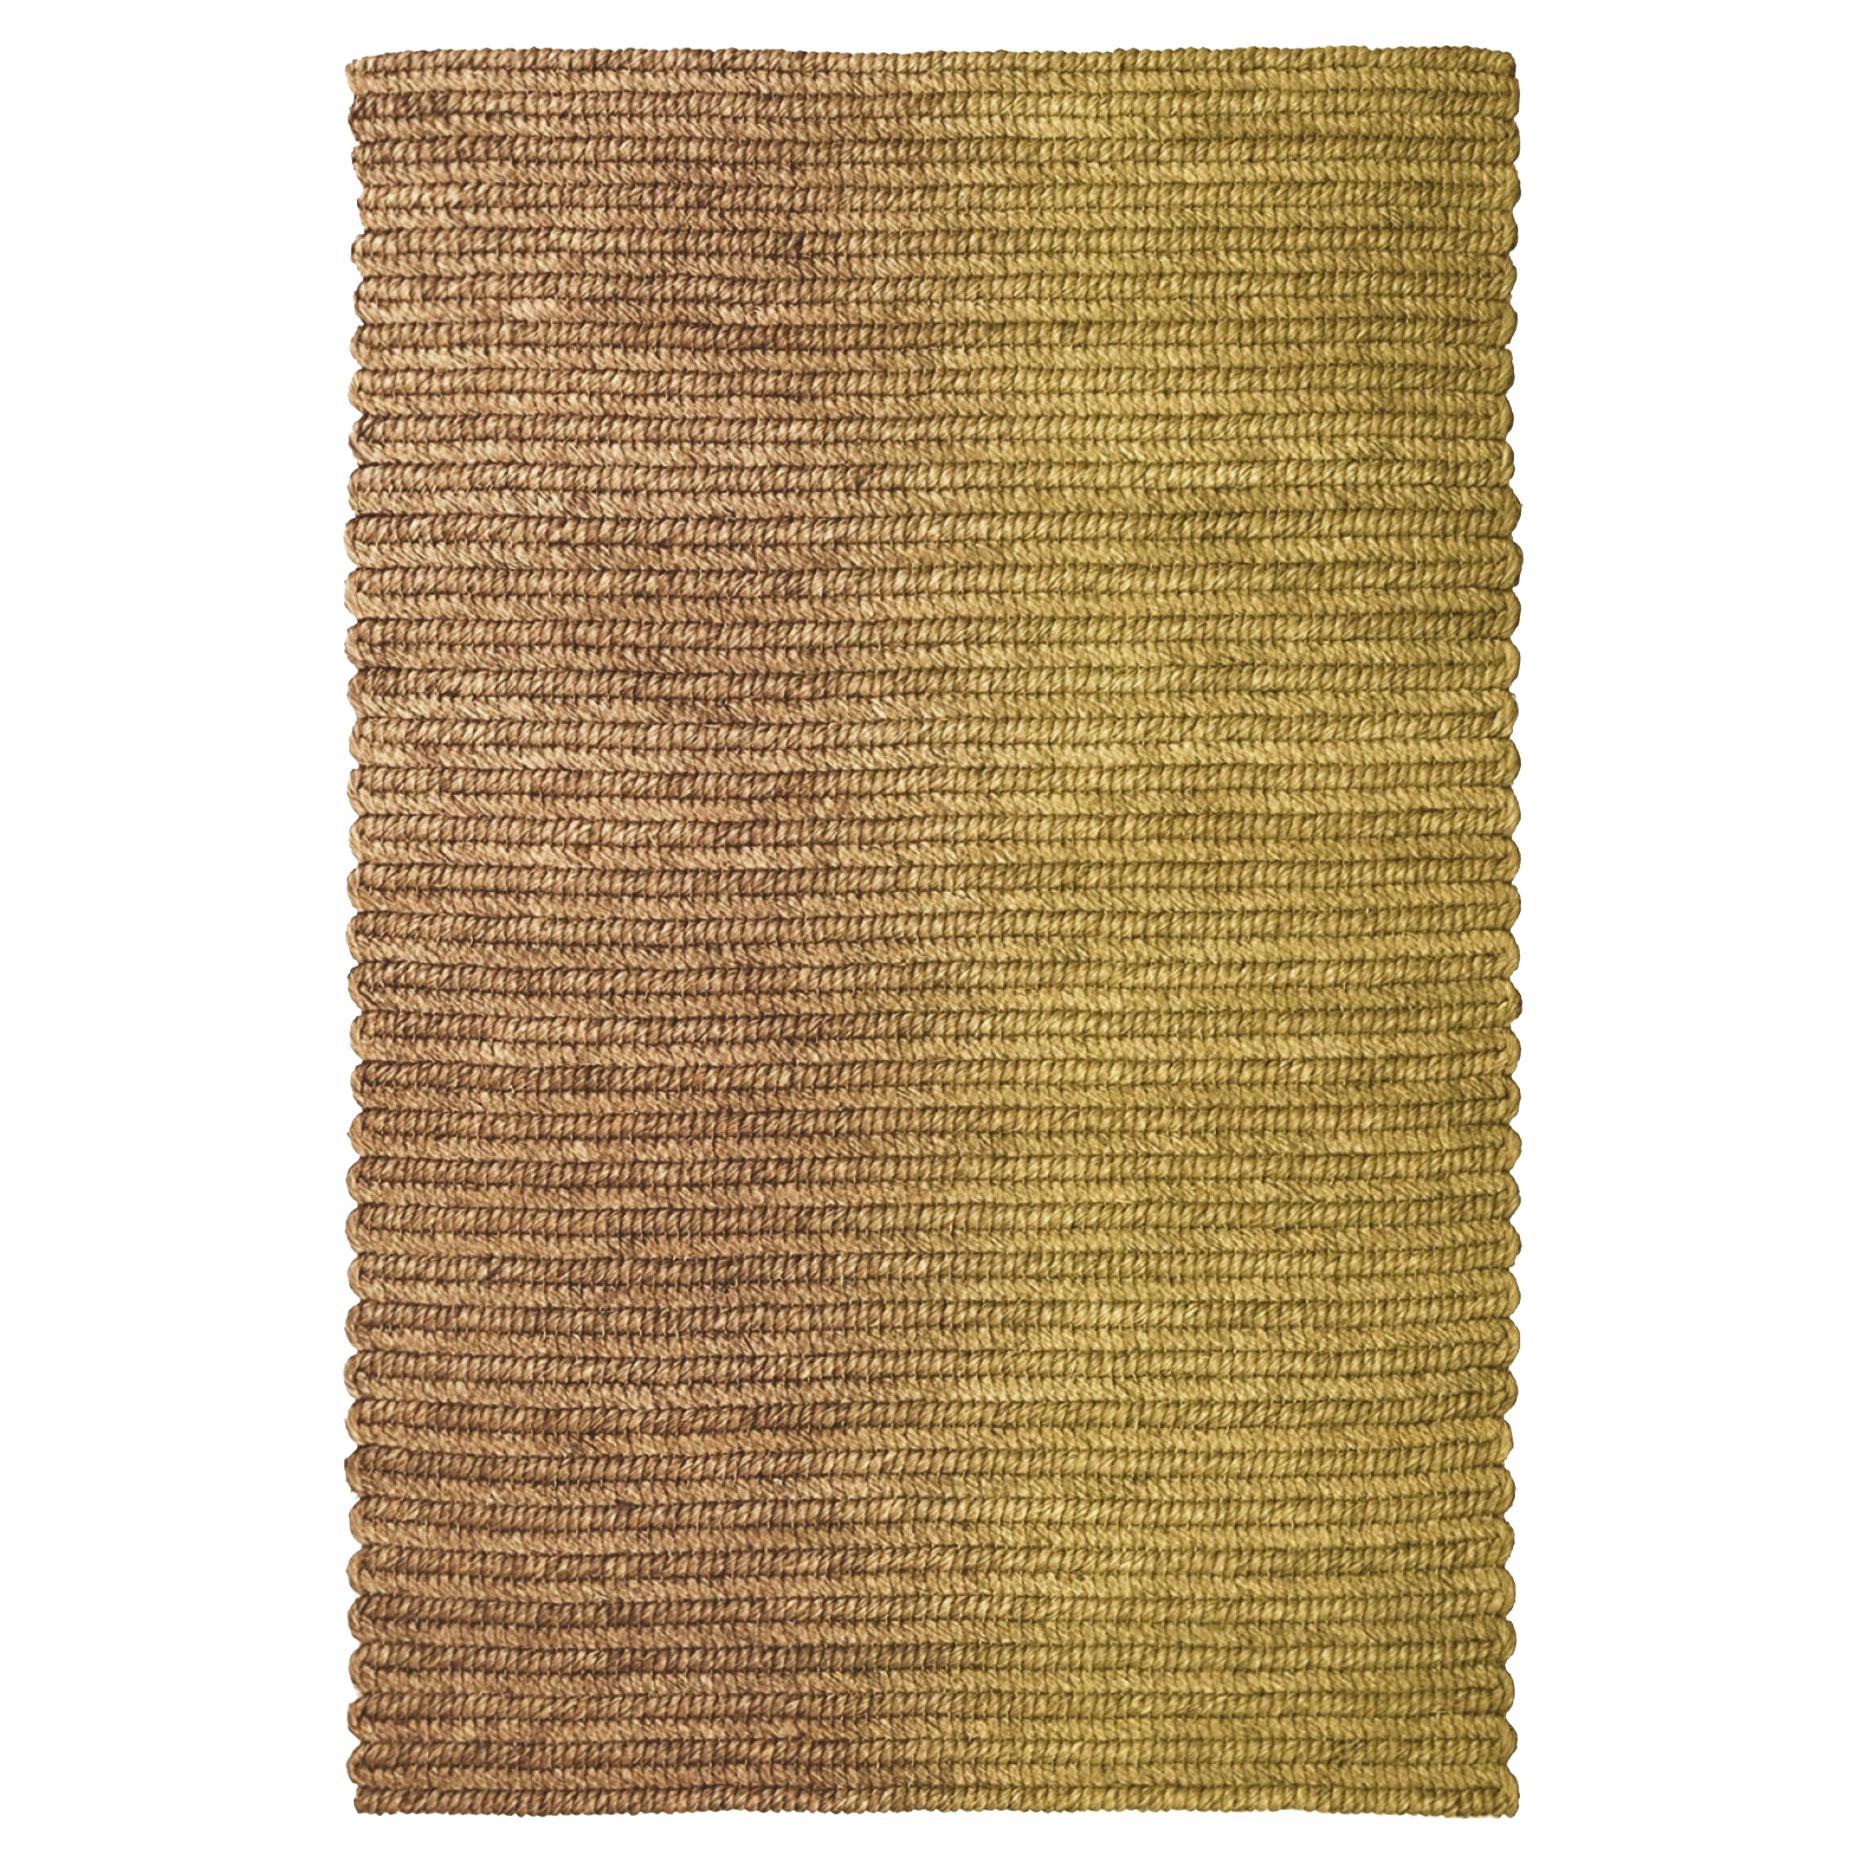 Claire Vos for Musett 'Switch' Abaca Indoor Rug in Spice, in 160 x 240 cm